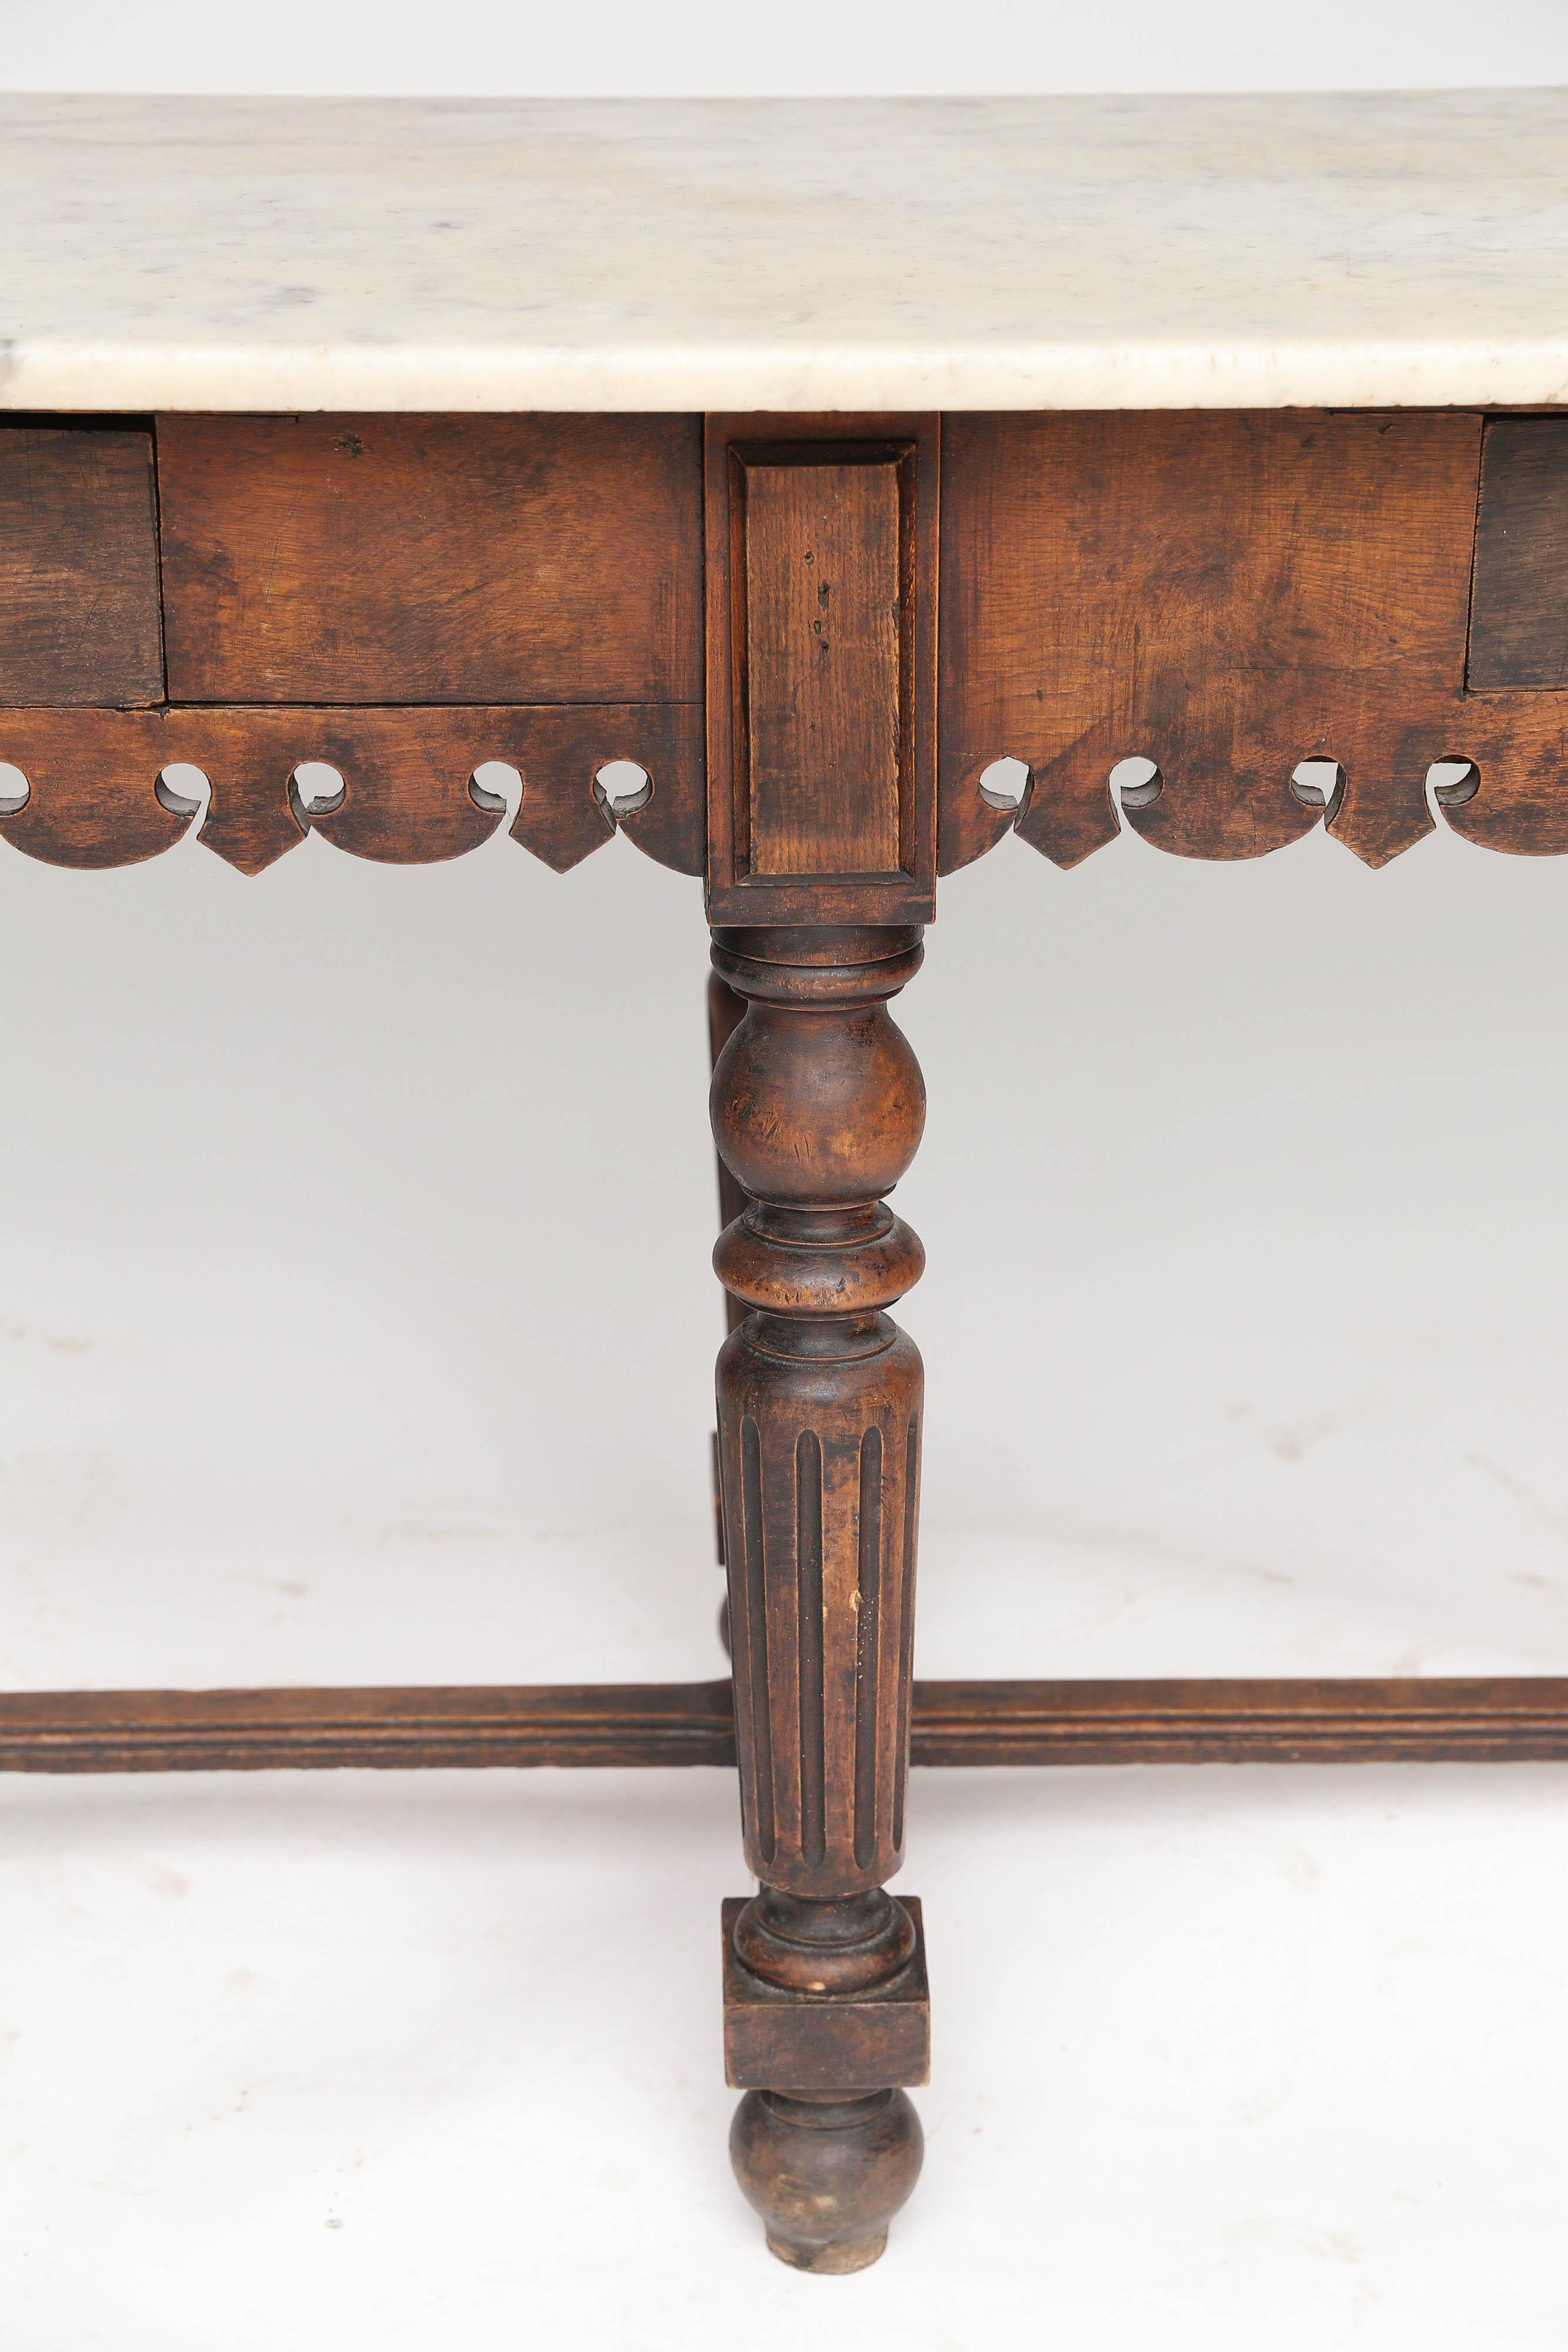 A spectacular antique French marble-top oak butcher table. Featuring an oak base with scalloped apron on both sides and two drawers for storage would make this piece a great addition to any kitchen. The beautiful aged patina marble top gives the